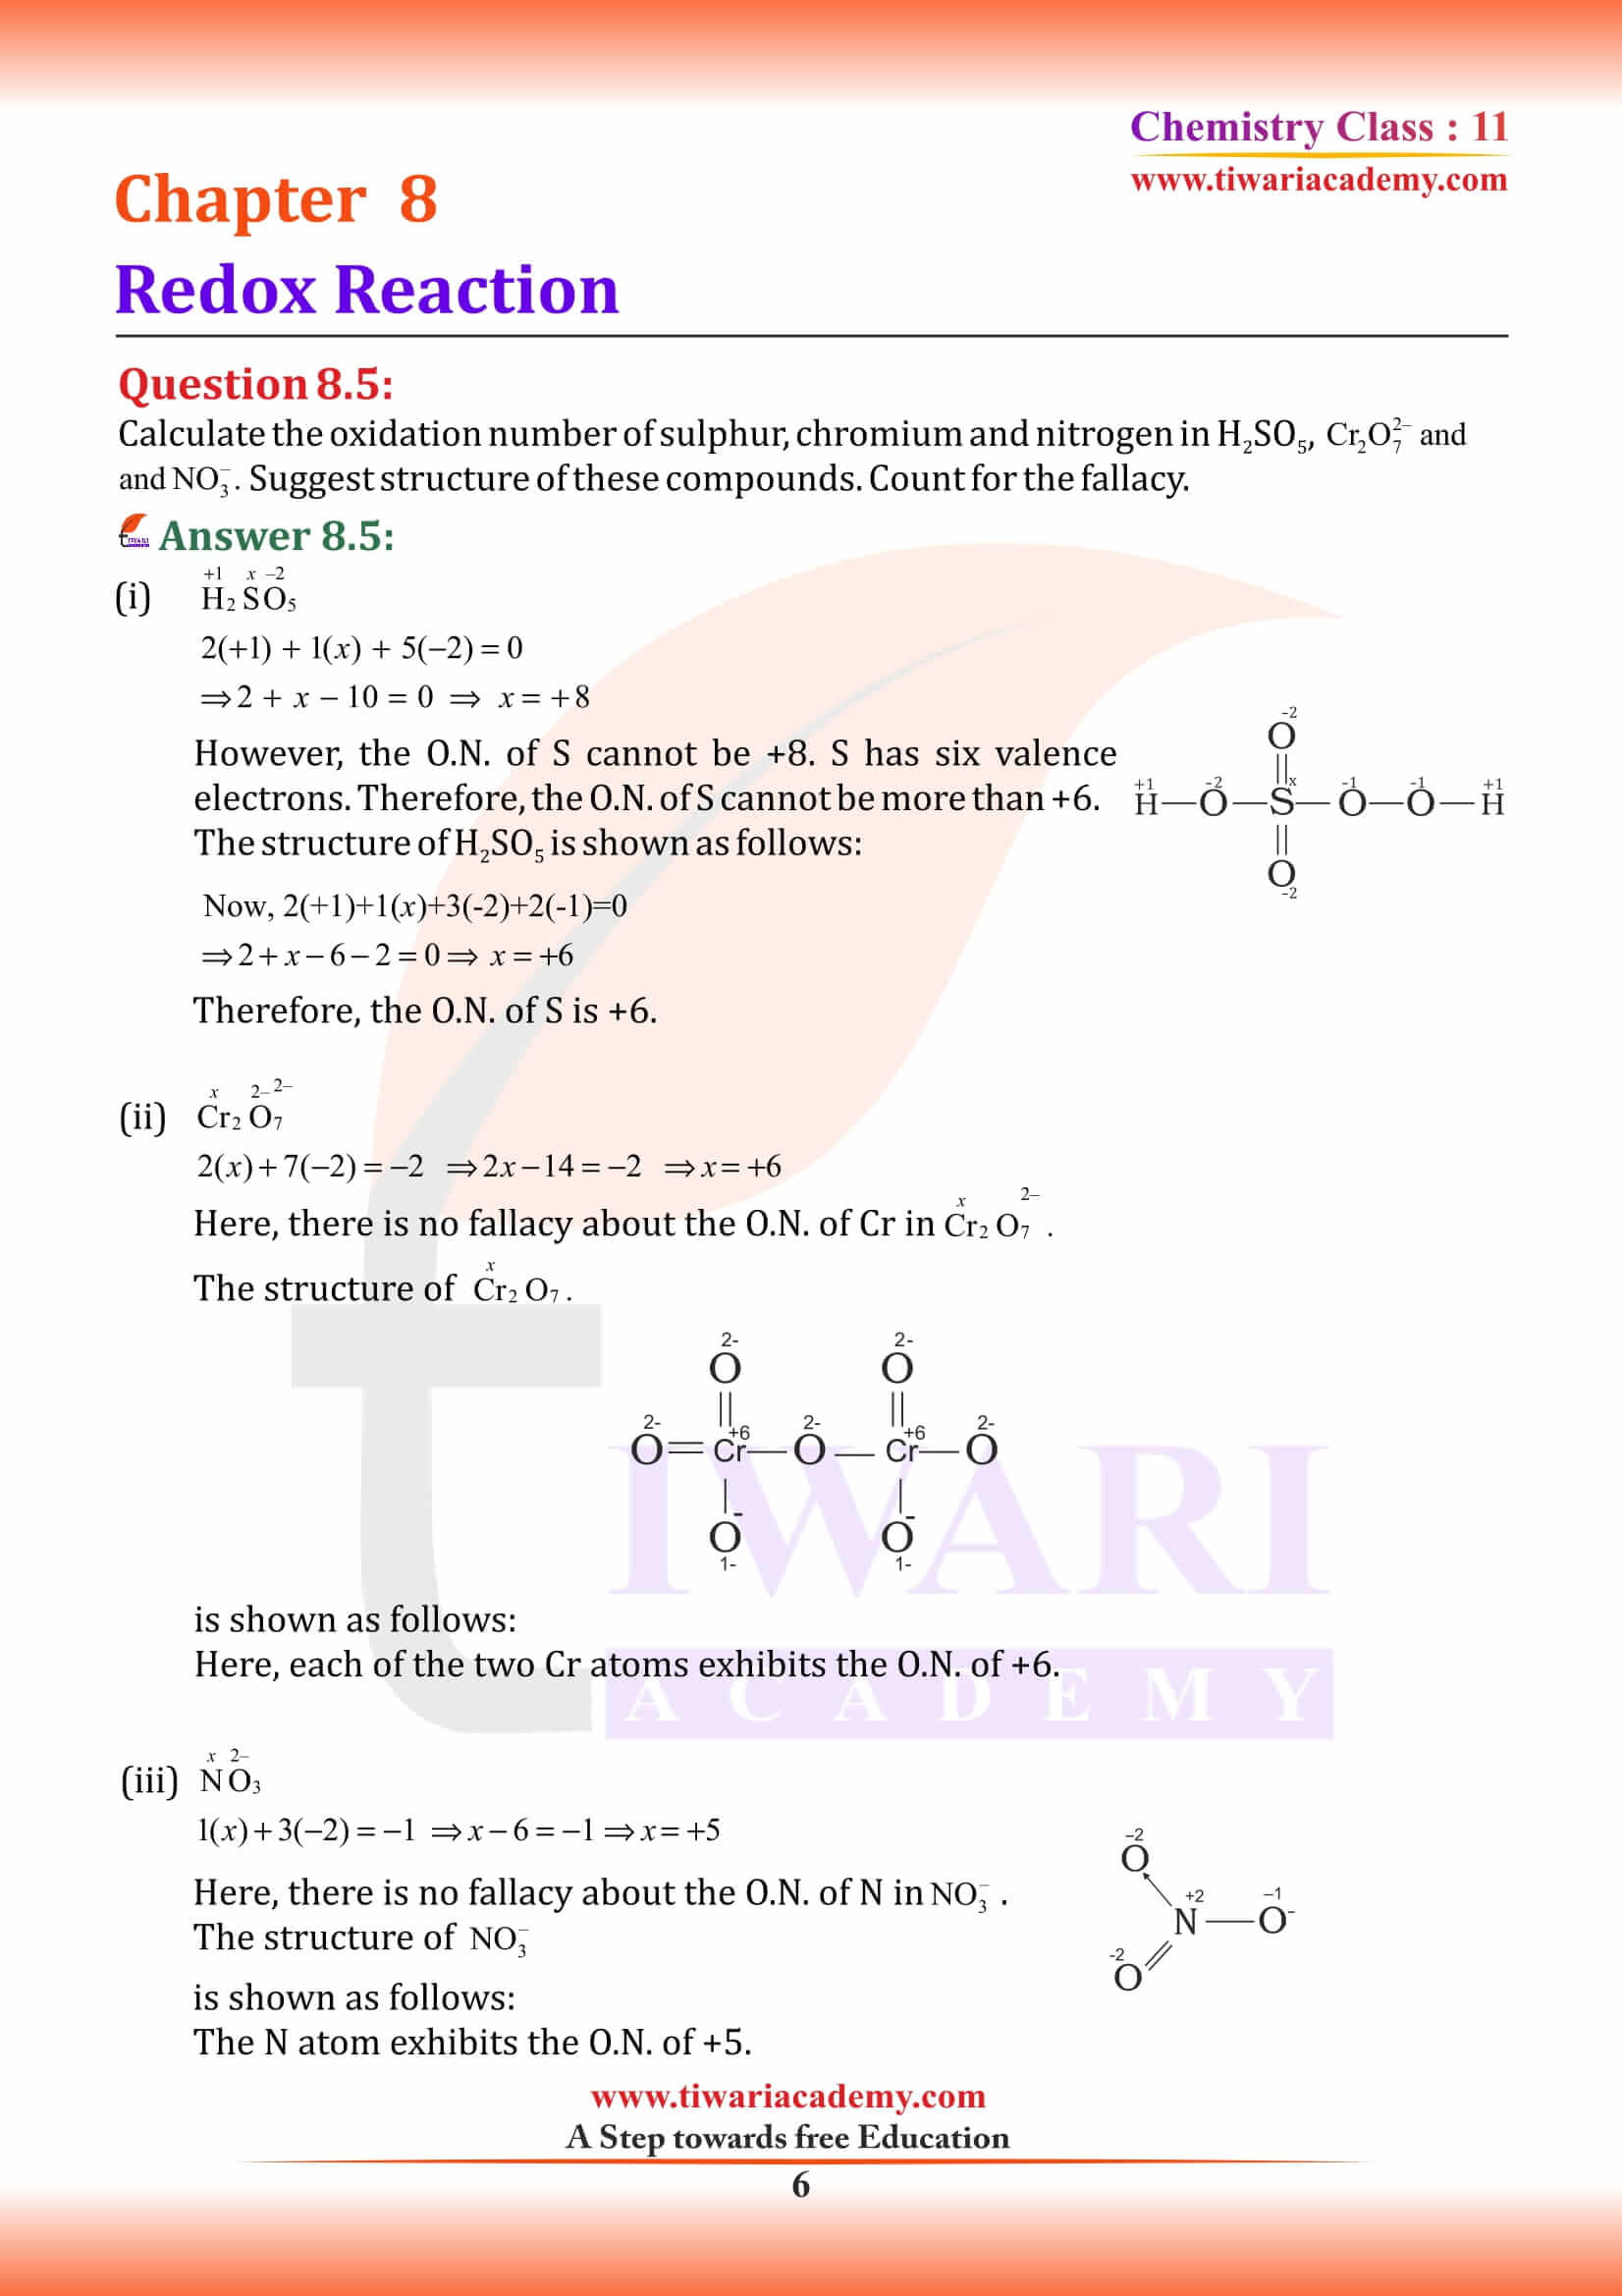 NCERT Solutions for Class 11 Chemistry Chapter 8 free to download